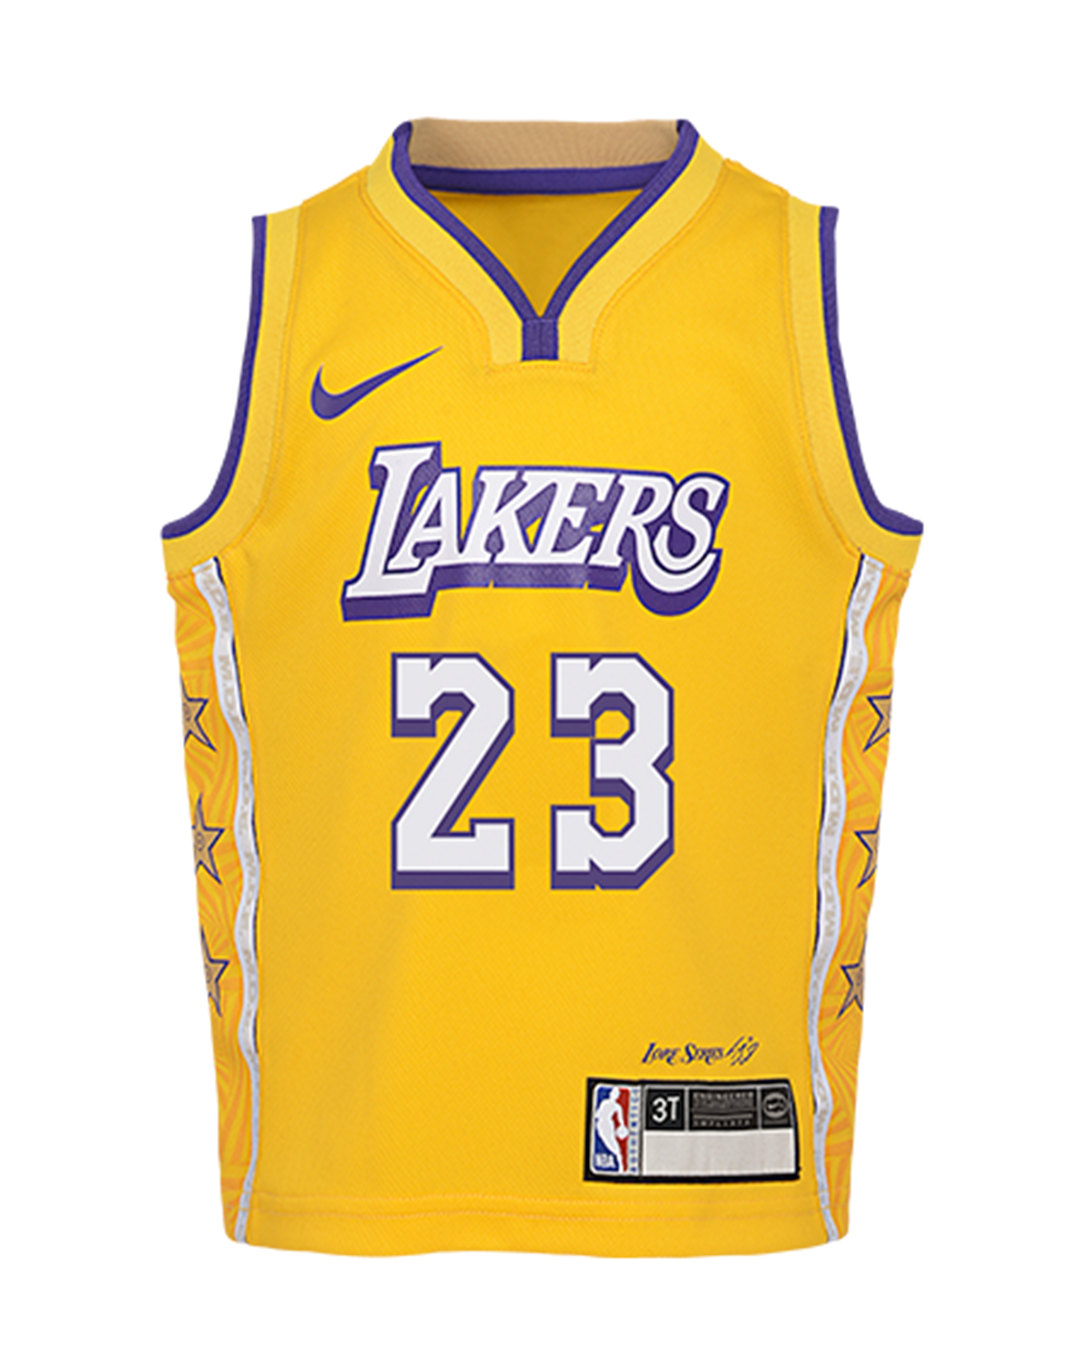 lebron lakers jersey city edition